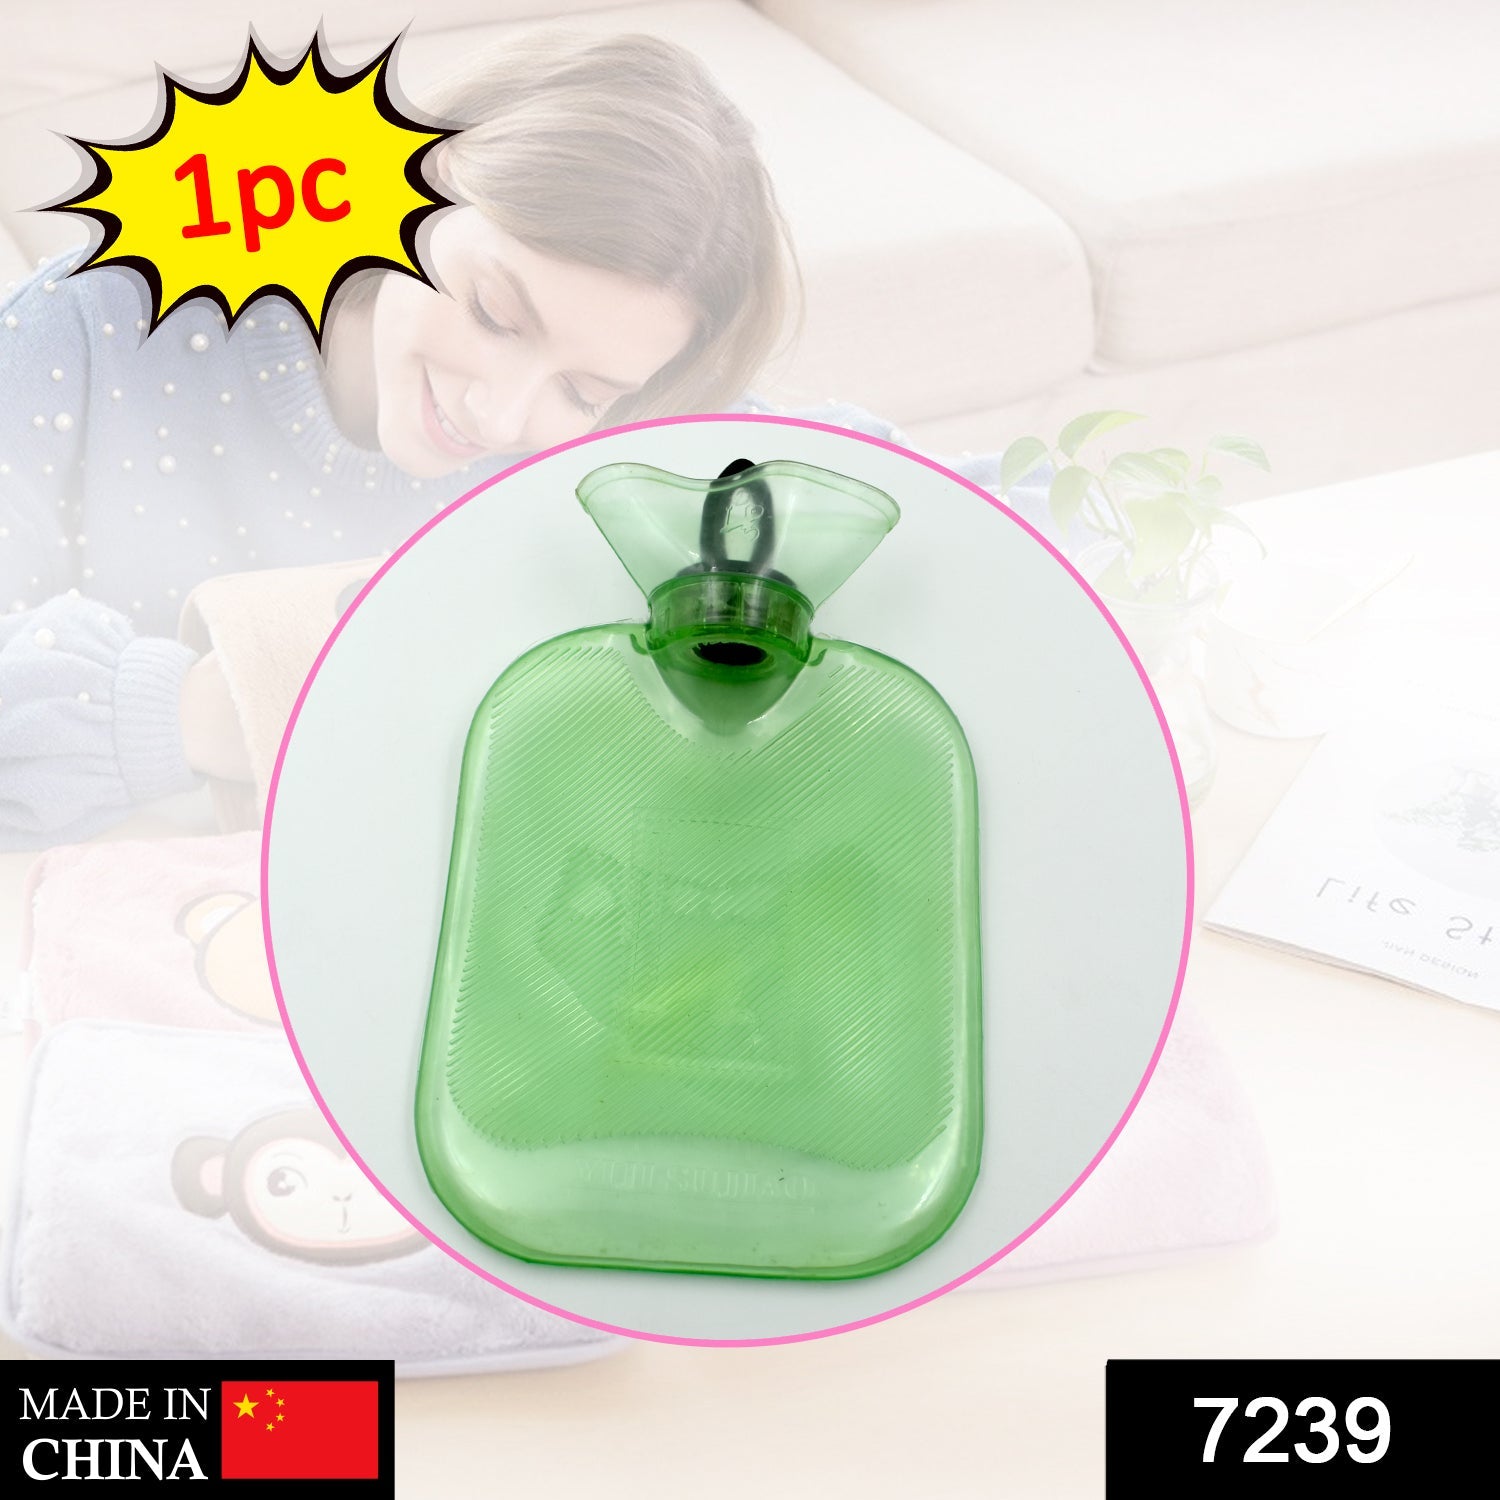 7239 Transparent Personal Care Rubber Hot Water Heating Pad Bag for Pain Relief (Small) 